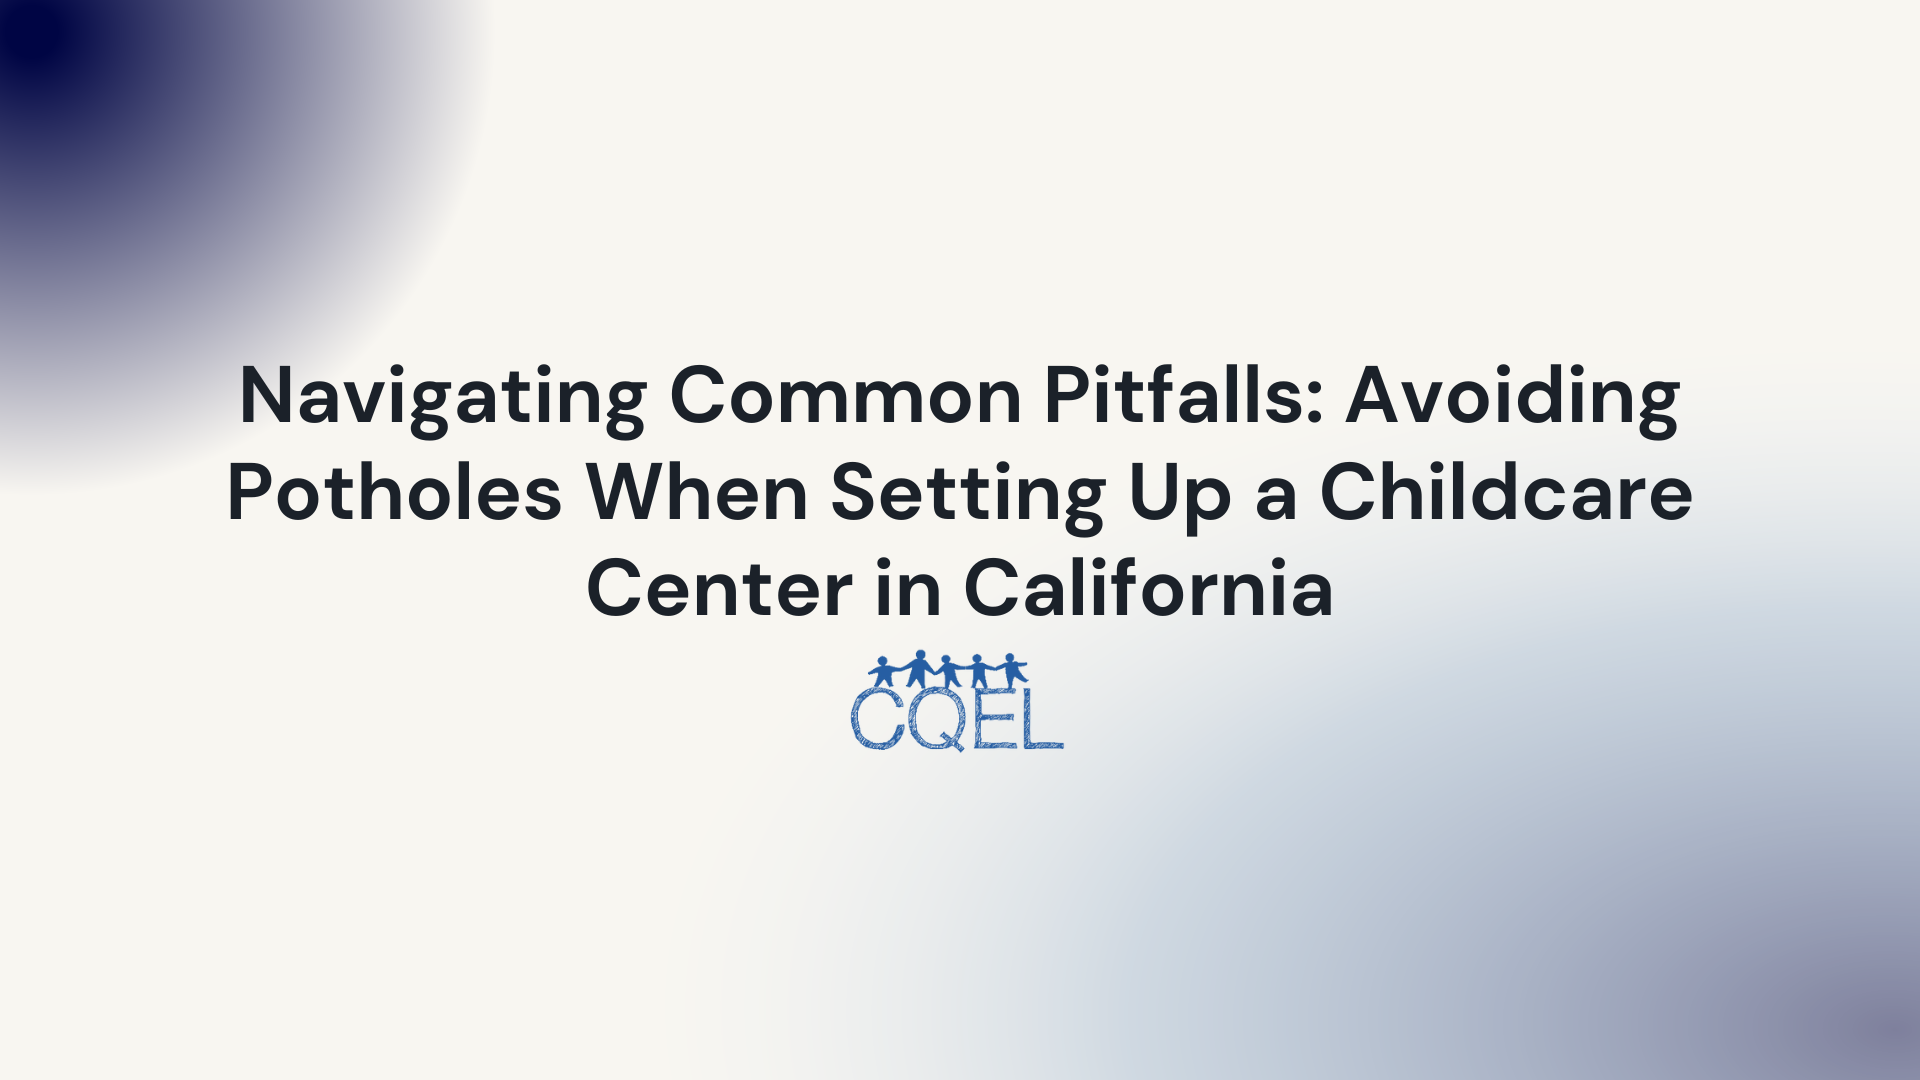 Navigating Common Pitfalls: Avoiding Potholes When Setting Up a Childcare Center in California